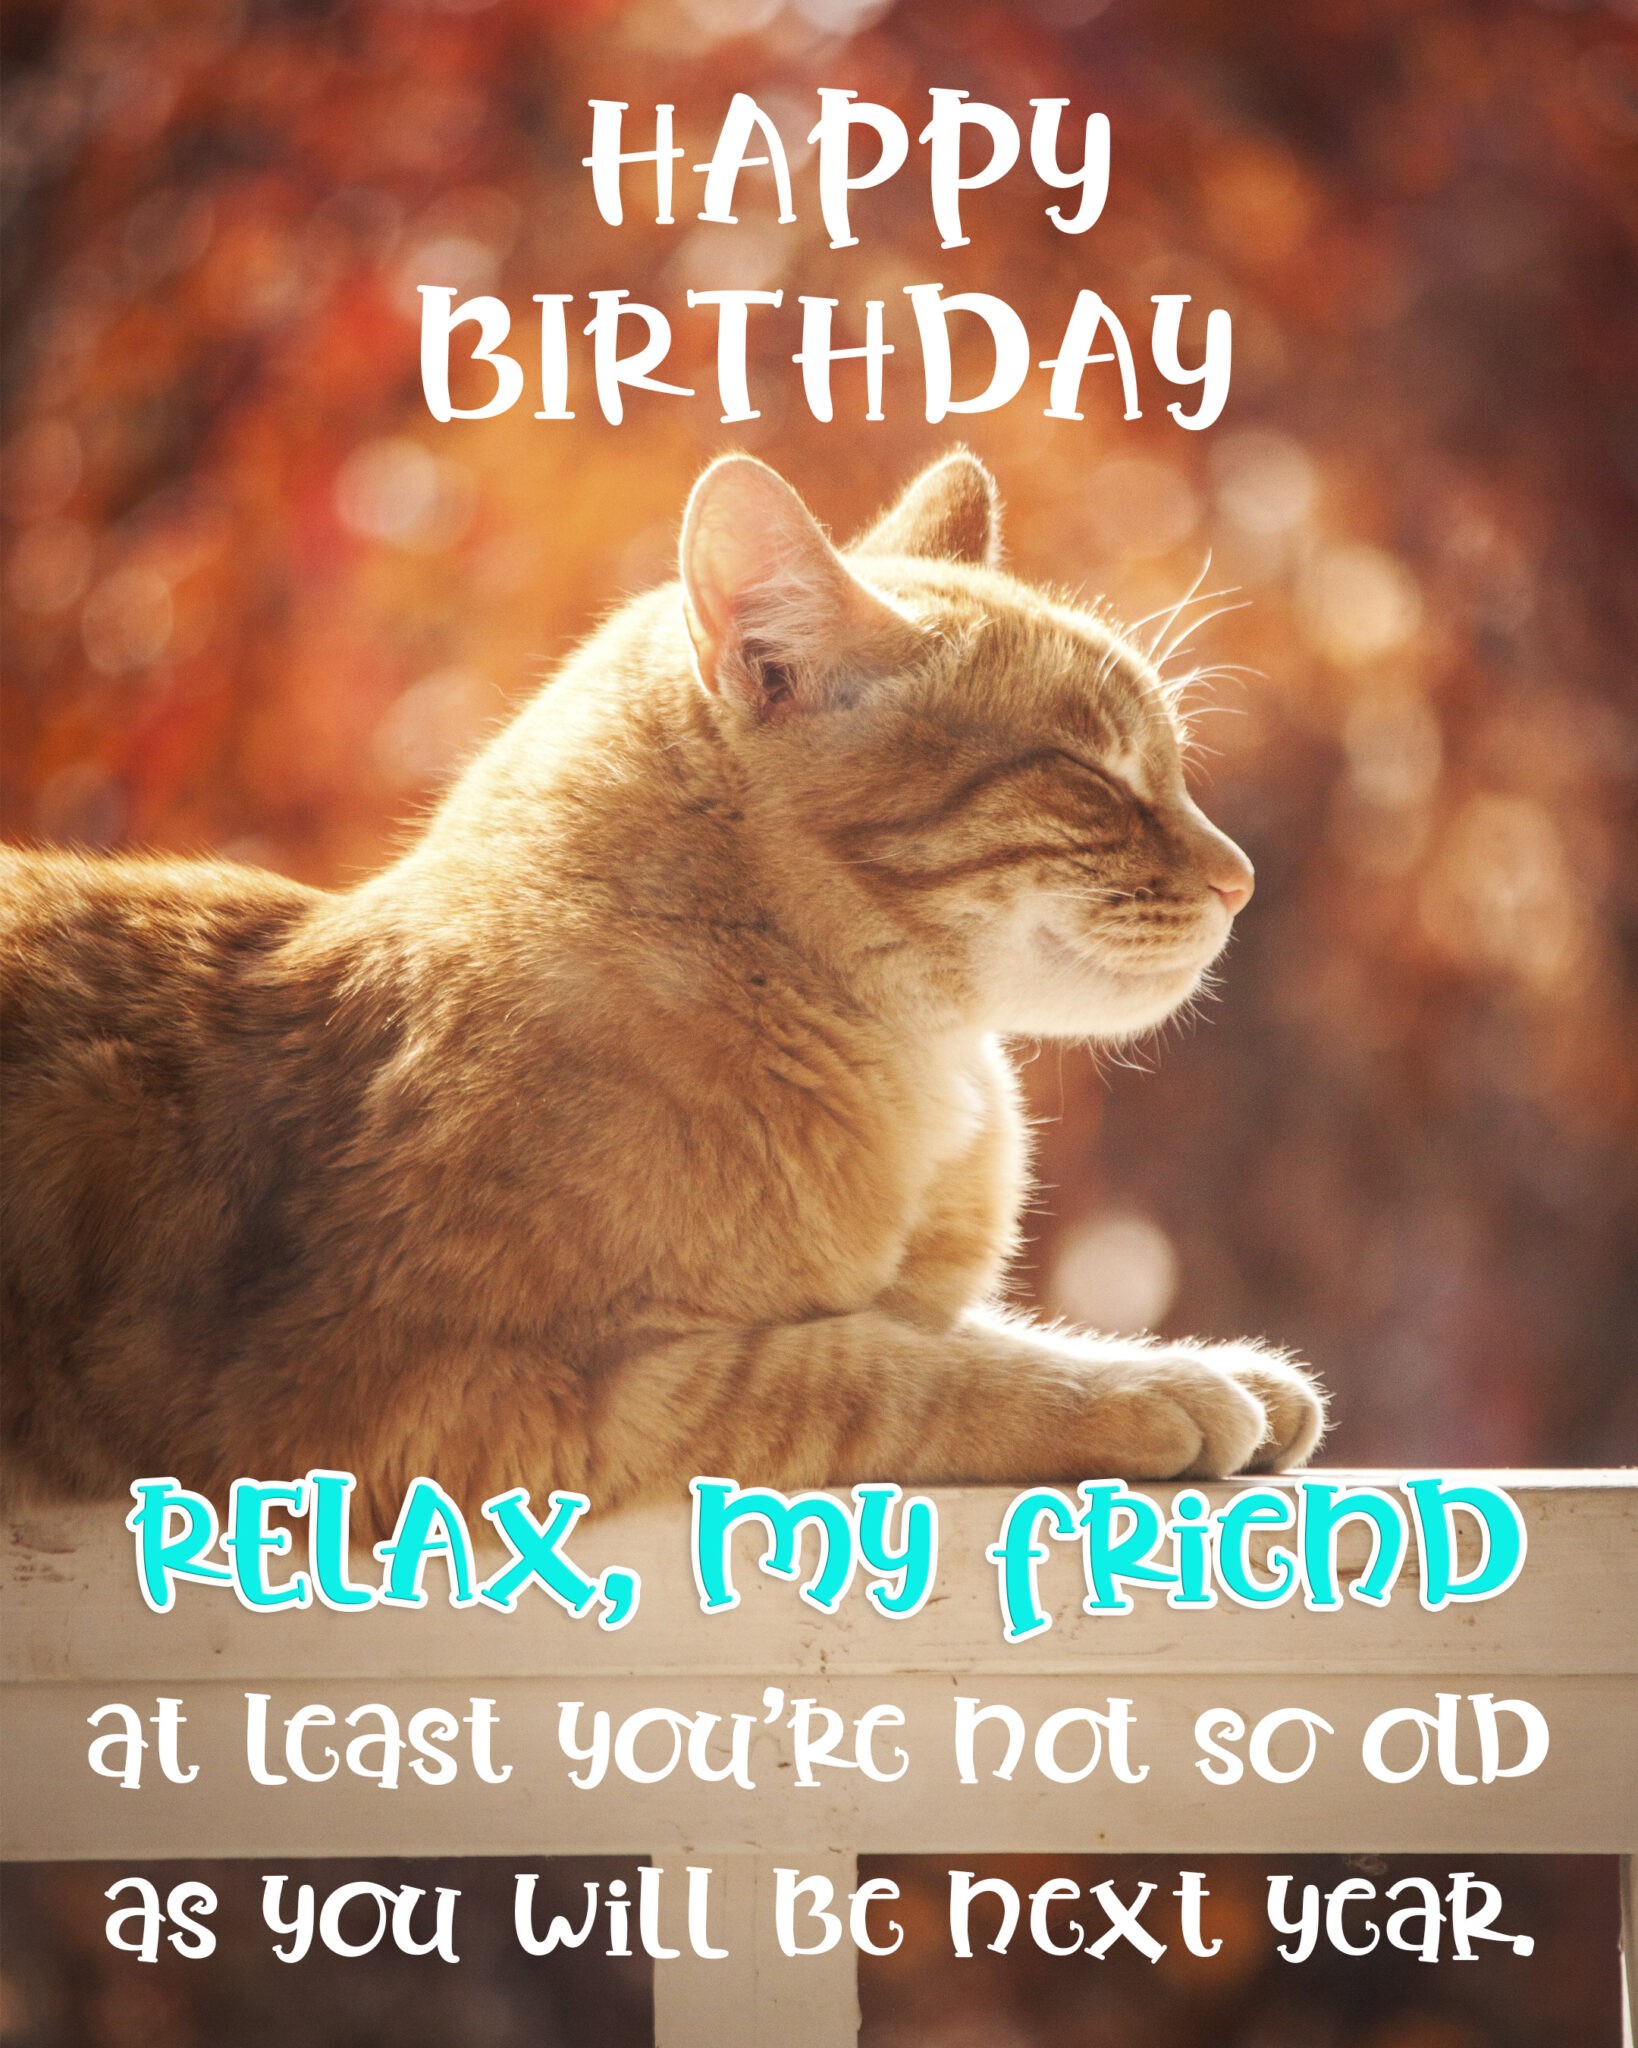 birthday-wishes-with-cats